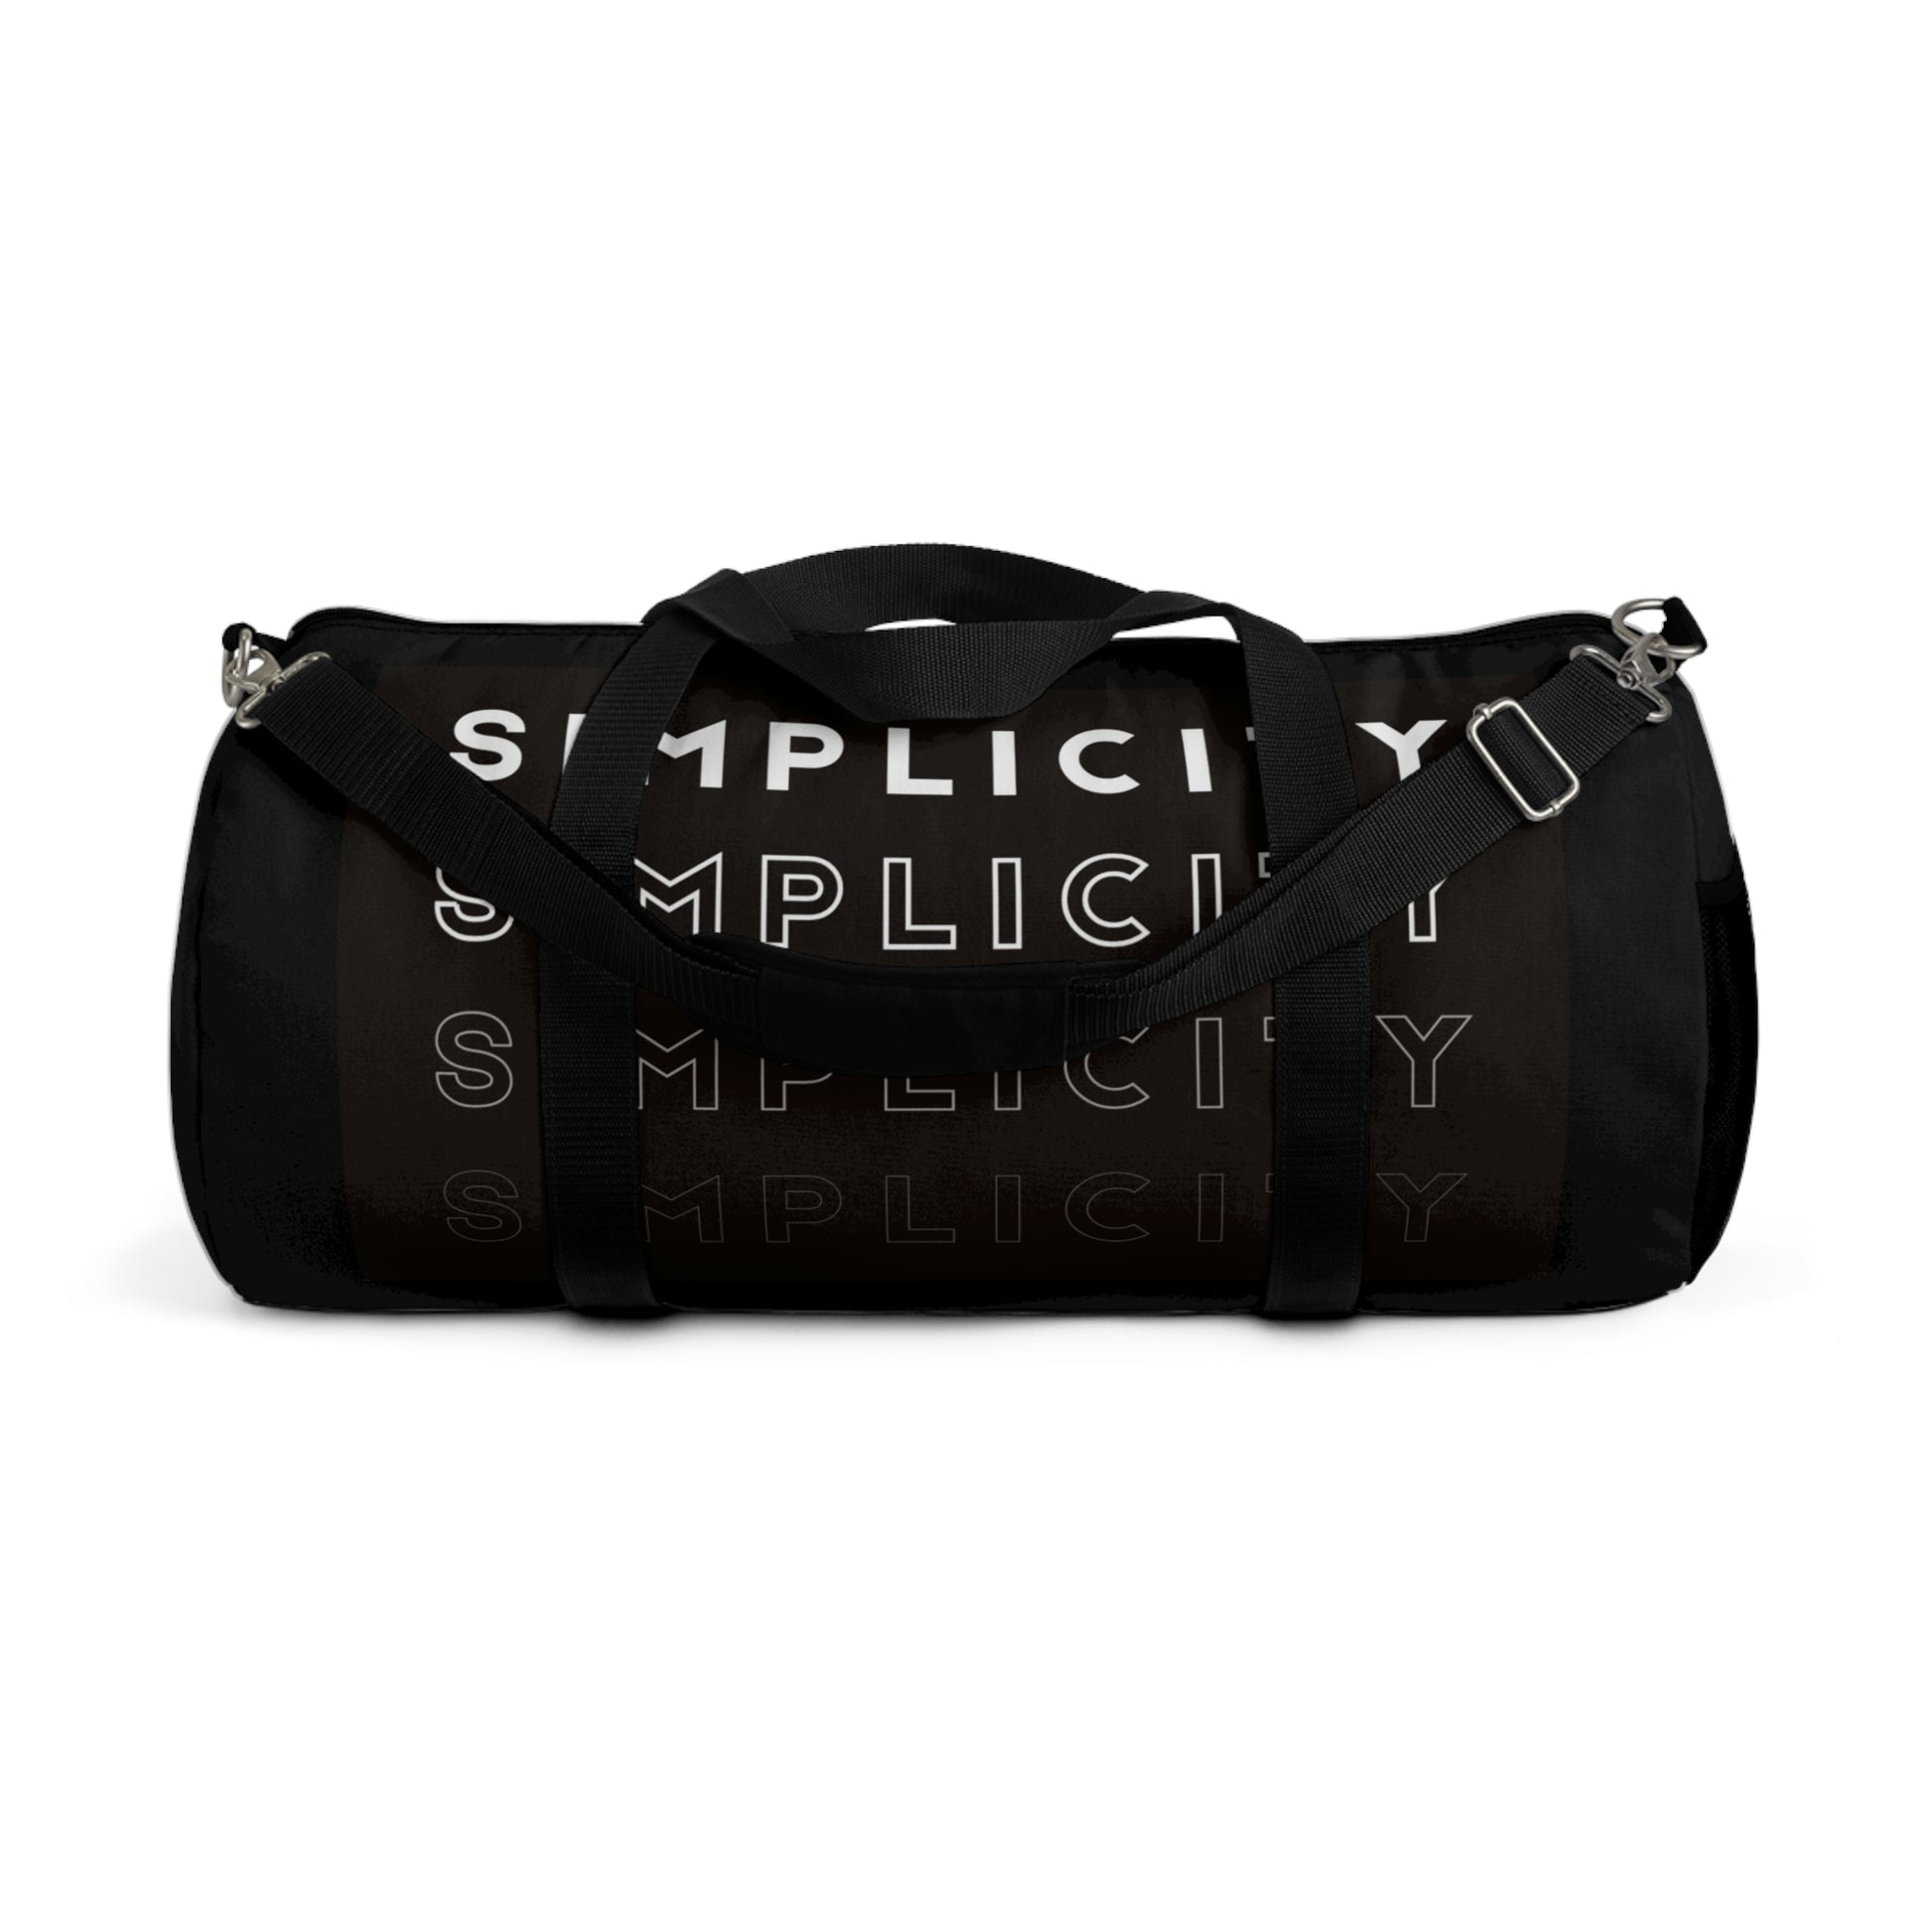 Simplicity Duffel Bag | BKLA | Shoes & Accessories | shoes, hats, phone covers, tote bags, clutch bags